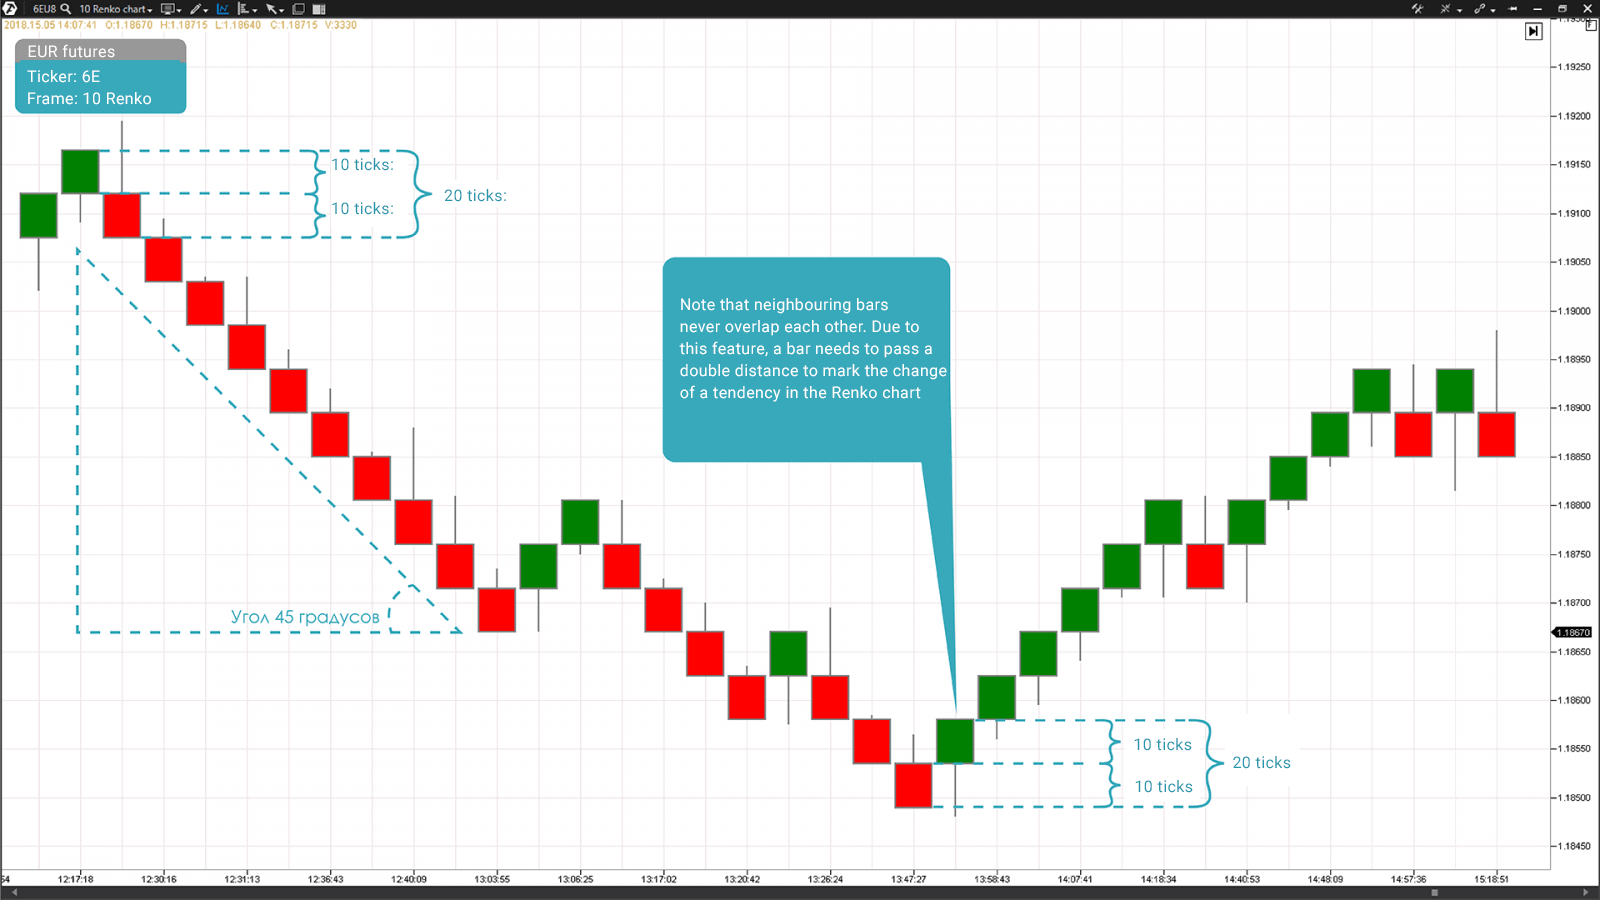 15-minute timeframe of a EUR futures contract